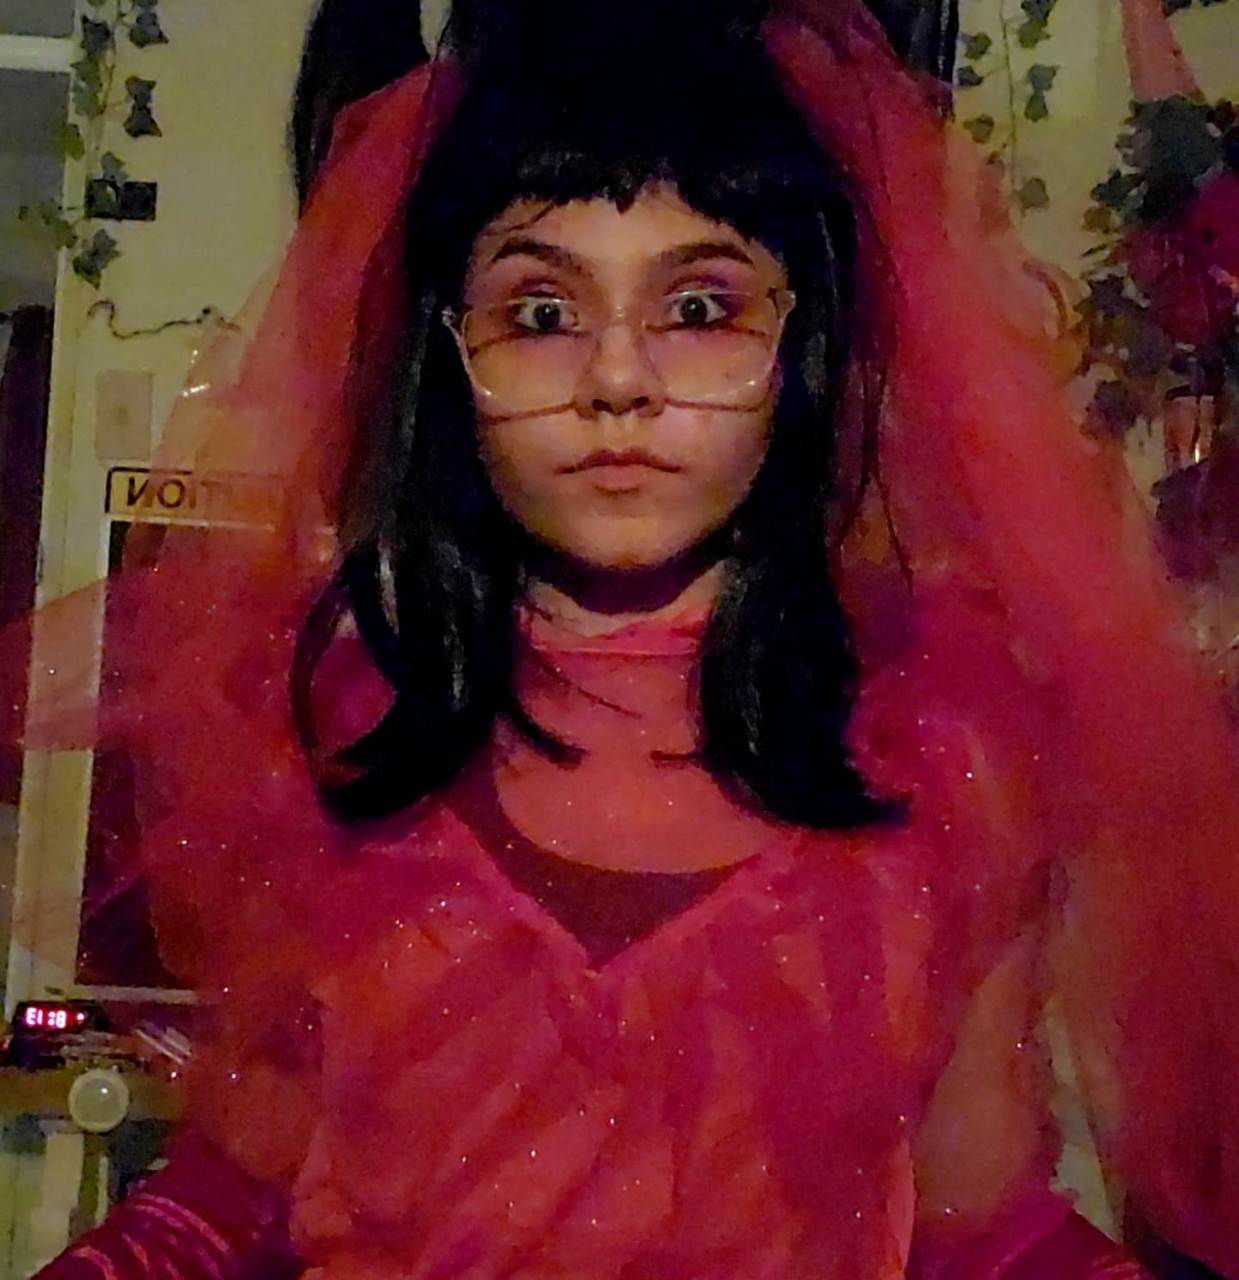 Cosplaying As Lydia Deetz From Beetlejuice